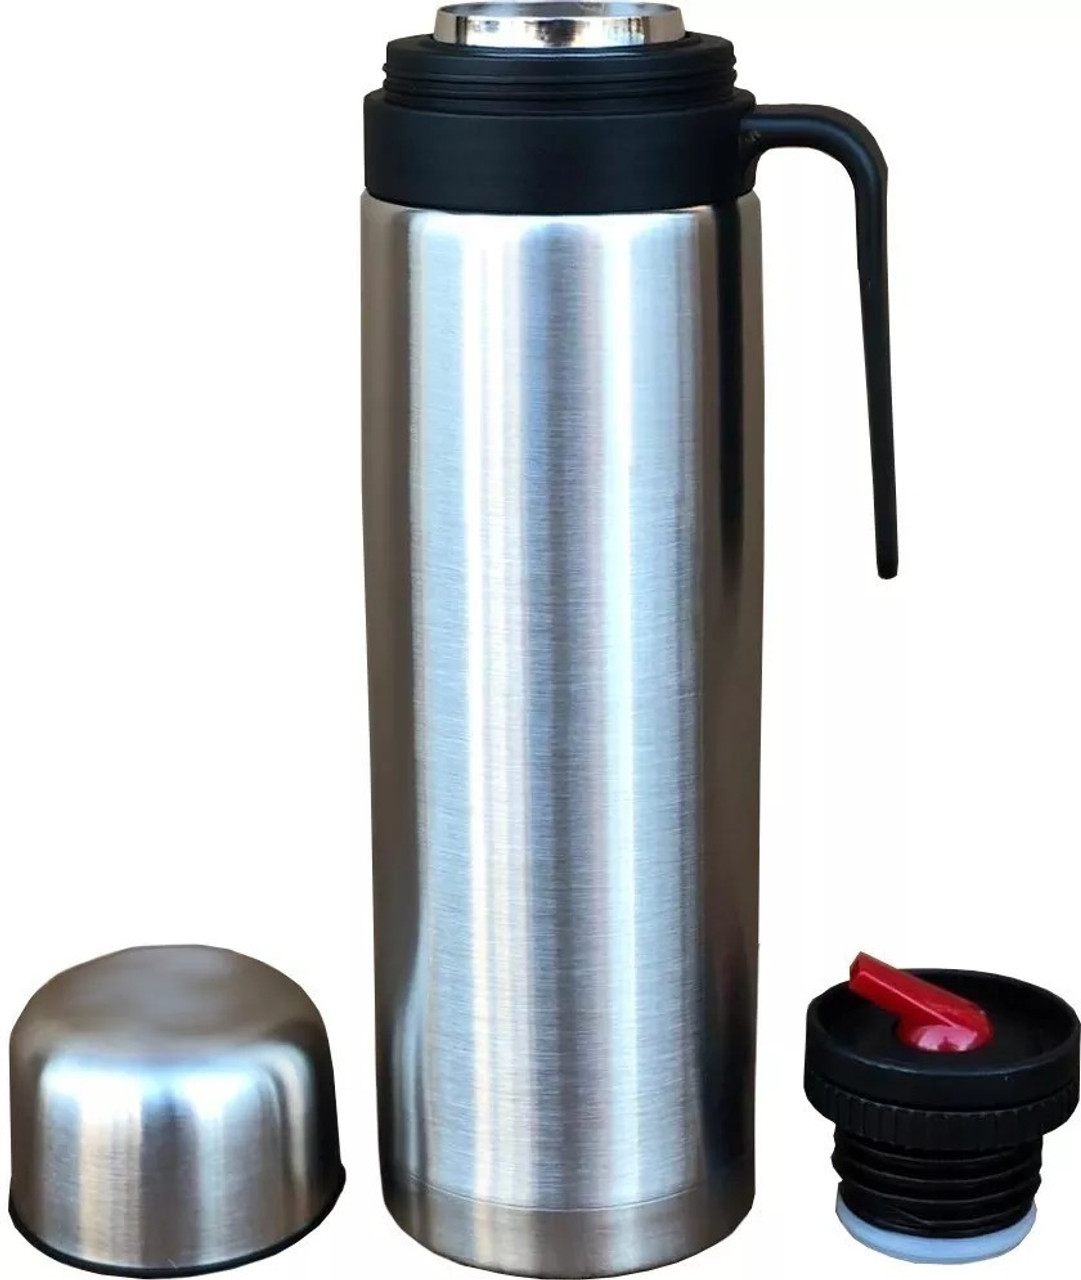 Lumilagro Stainless Steel Thermos Vacuum Bottle with Pouring Beak for Mate  Termo Pico Vertedor Cebador, 1 L / 33.8 oz